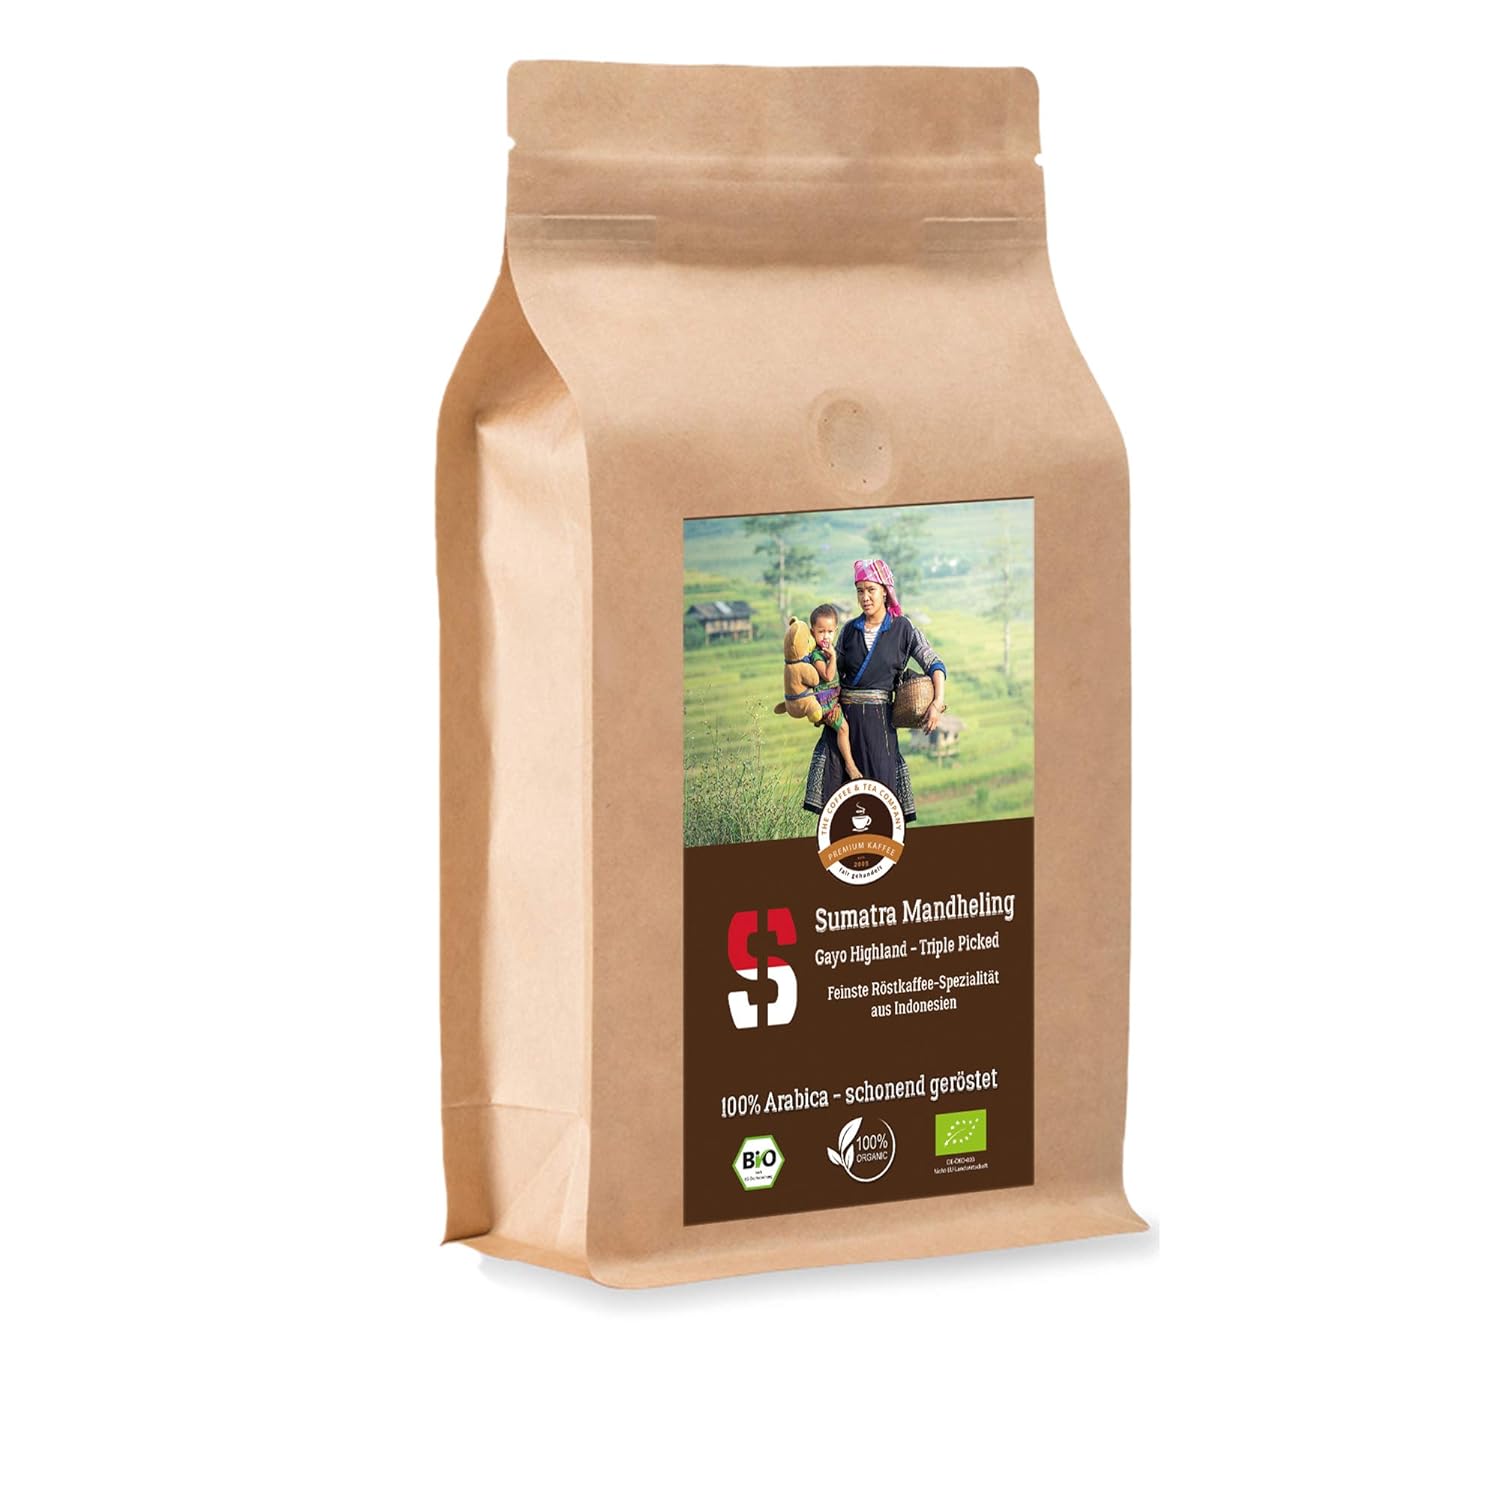 Coffee Globetrotter - Sumatra Mandheling Gayo Highland - Organic - 500 g Coarse Ground - for Stamp Jug French Press Coffee Maker - Top Coffee - Roasted Coffee from Organic Cultivation